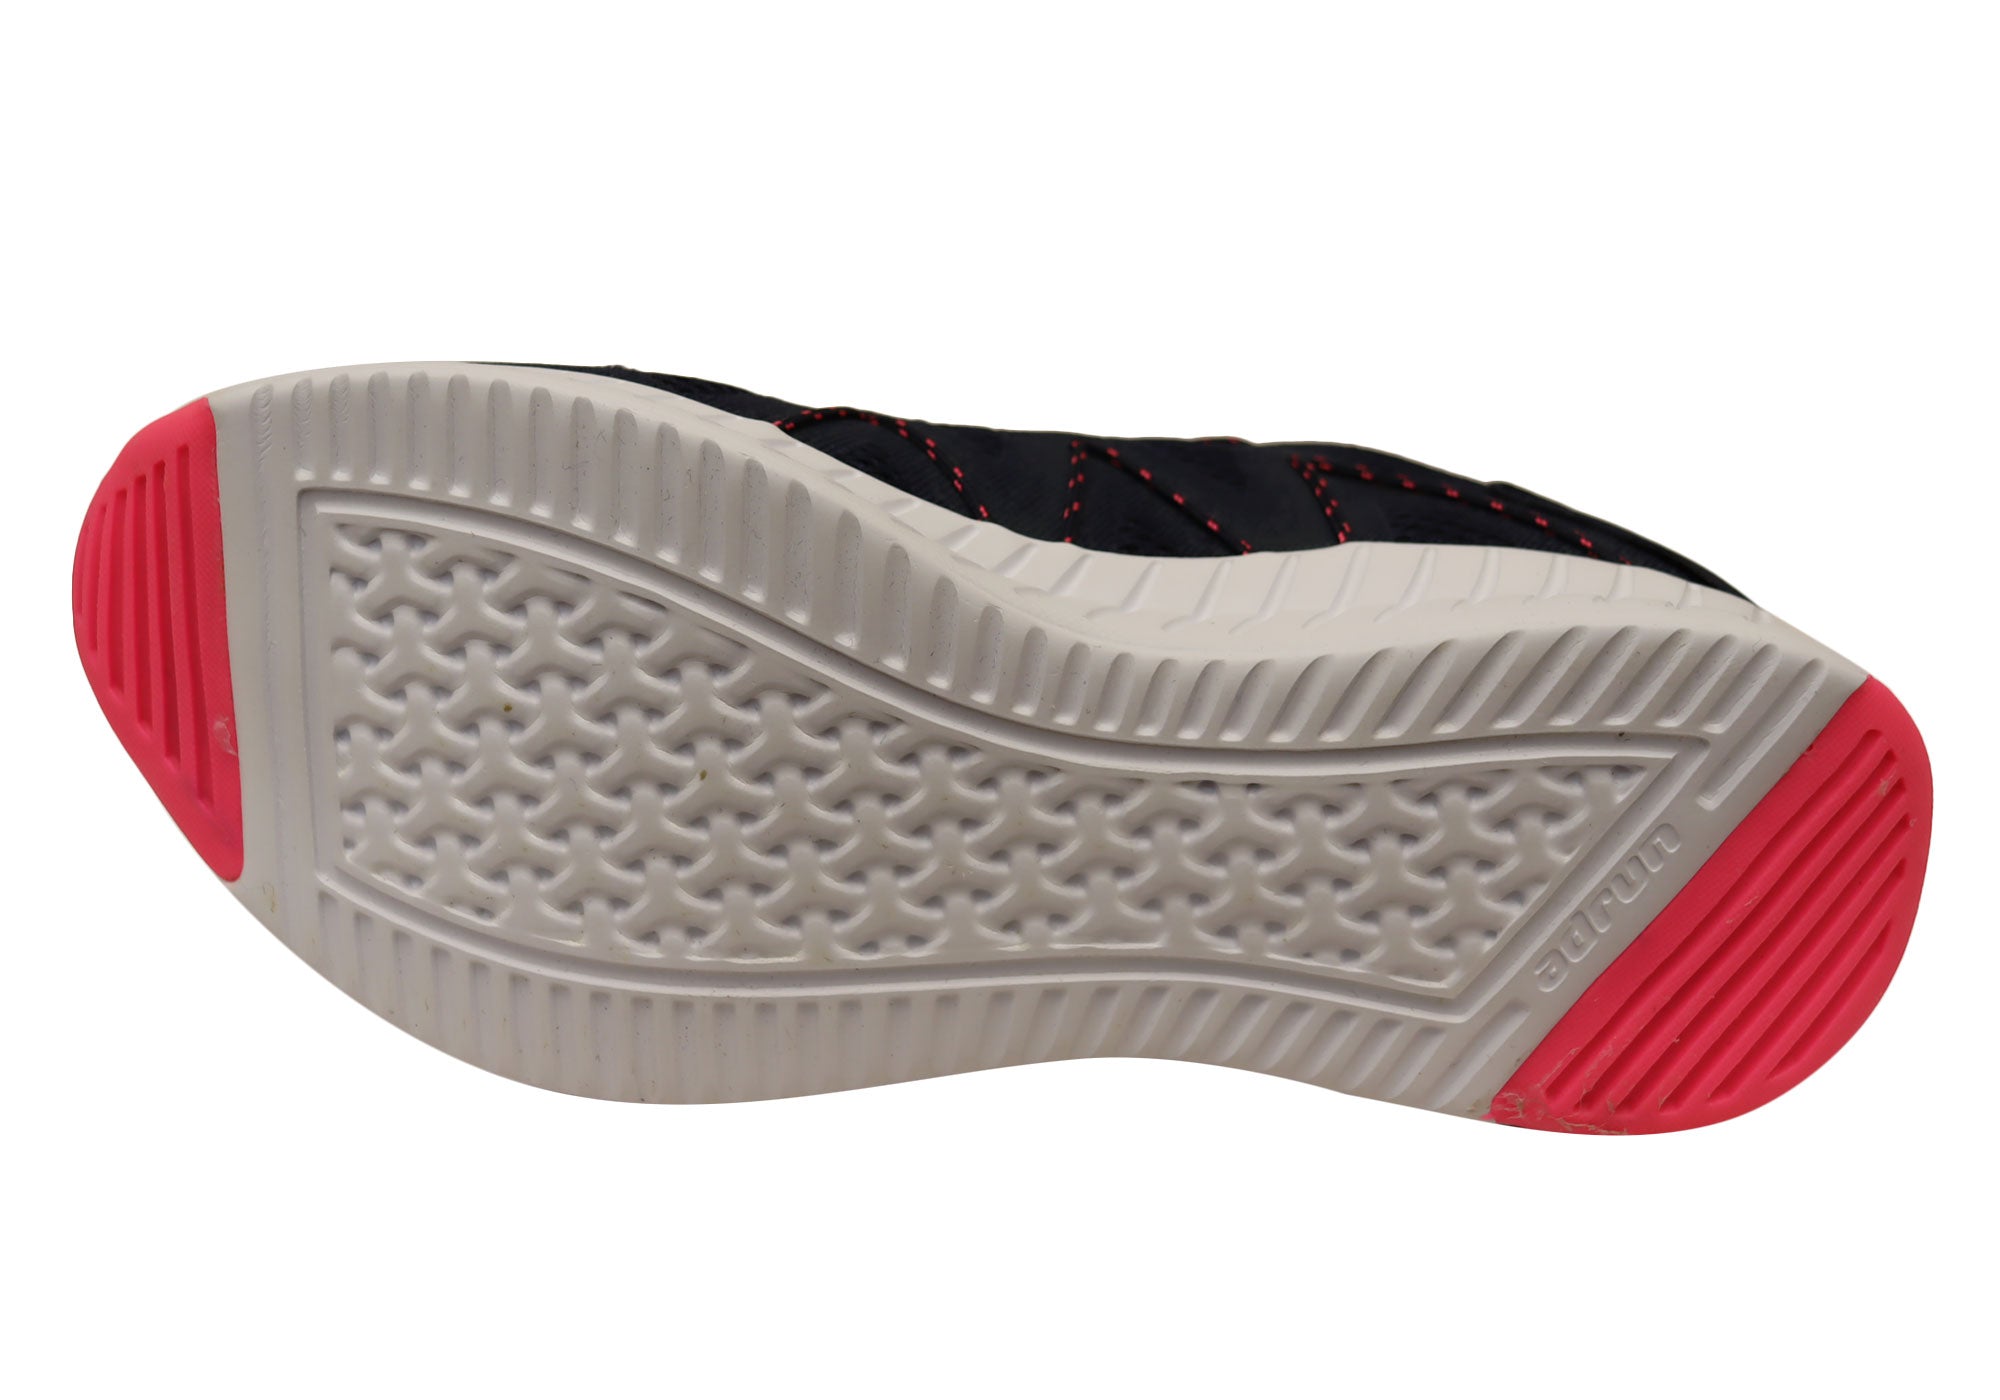 Adrun Lyric Womens Comfortable Athletic Shoes Made In Brazil